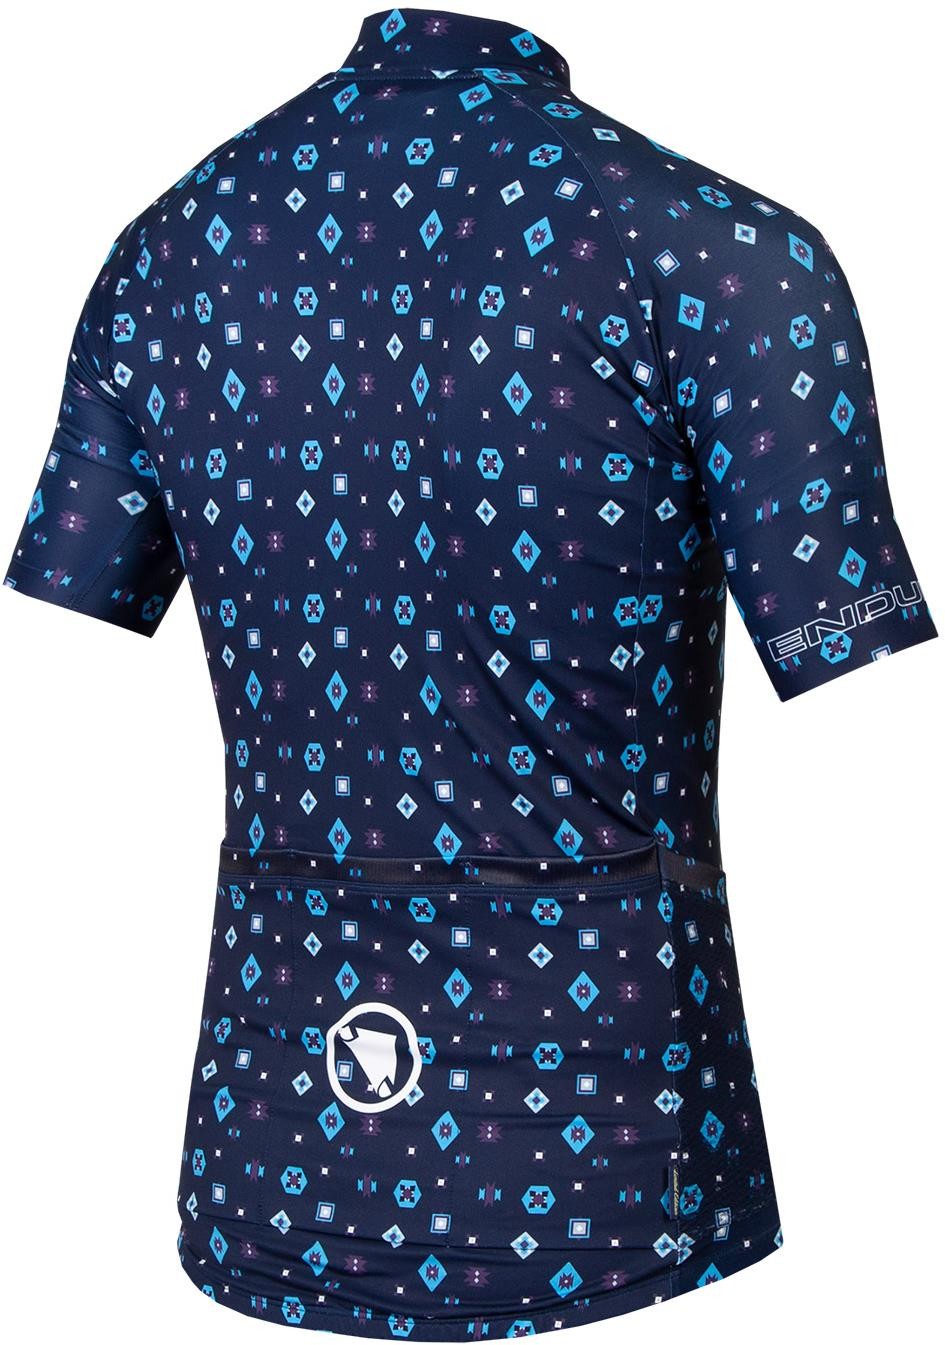 Supercraft Short Sleeve Cycling Jersey Limited Edition image 1